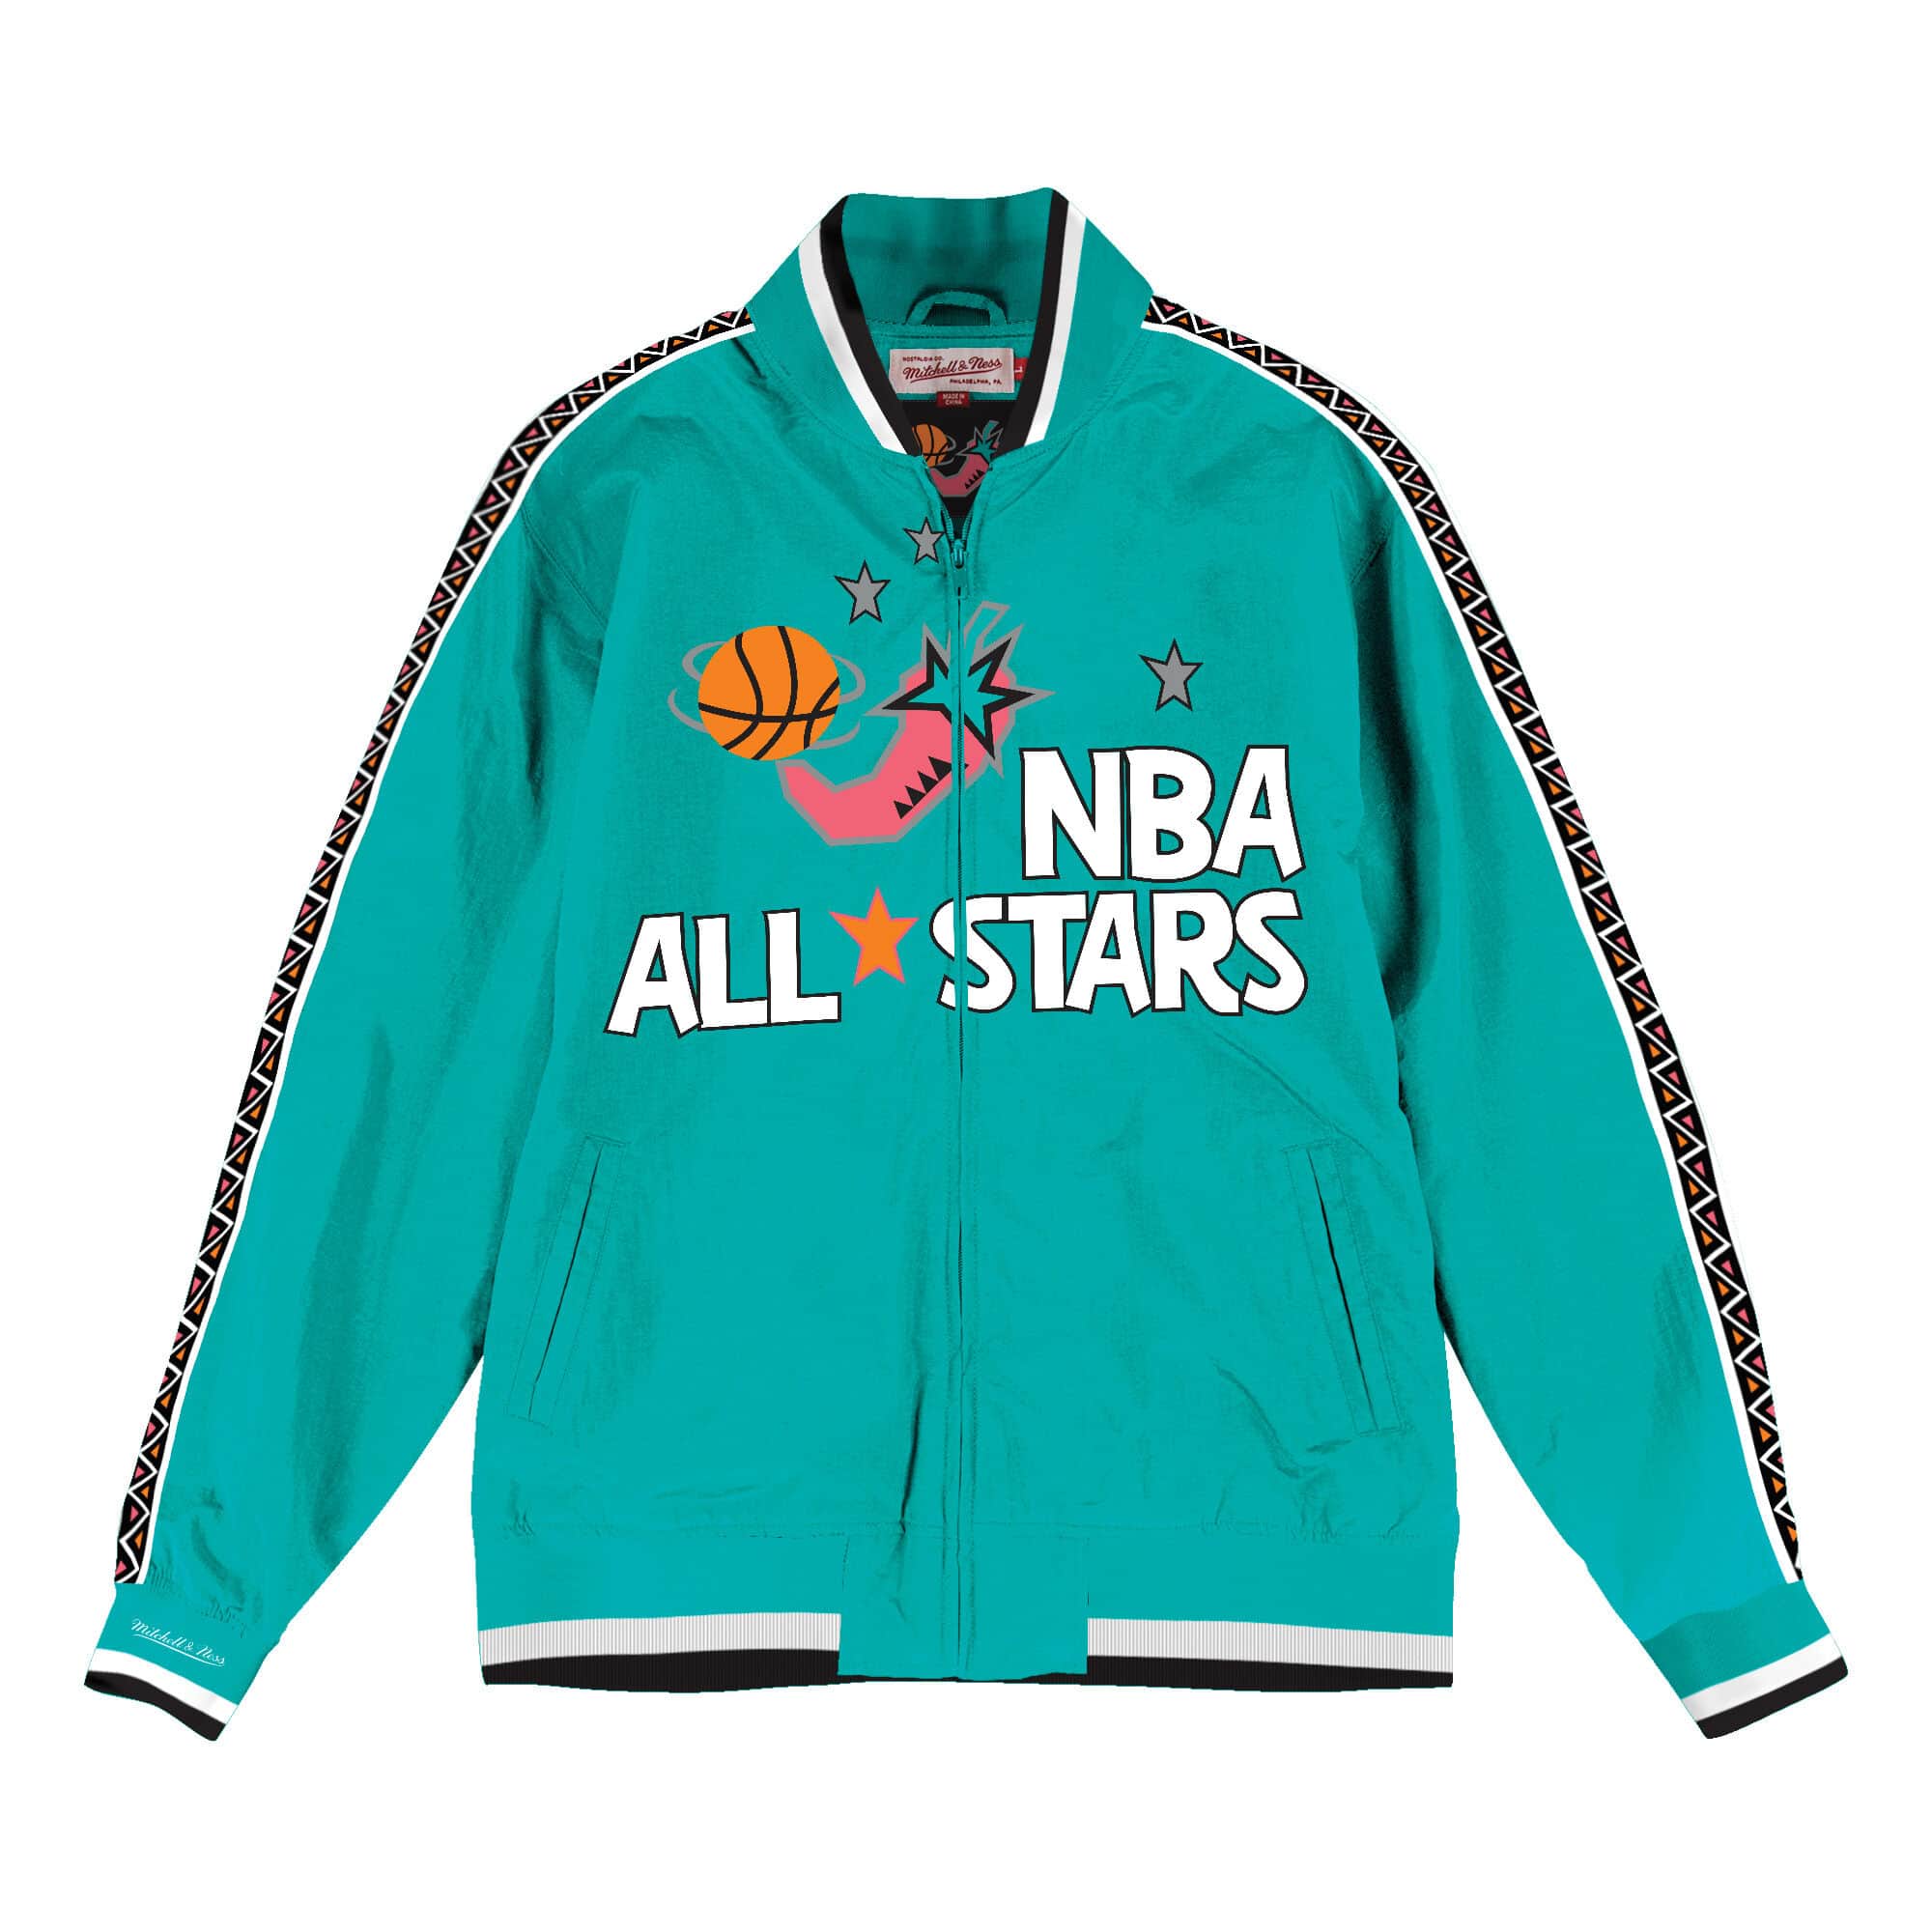 Mitchell & Ness Team History Warm Up Jacket 1996 All Star Game Mens Apparel L / 6361SAS1M96AW2 / Teal